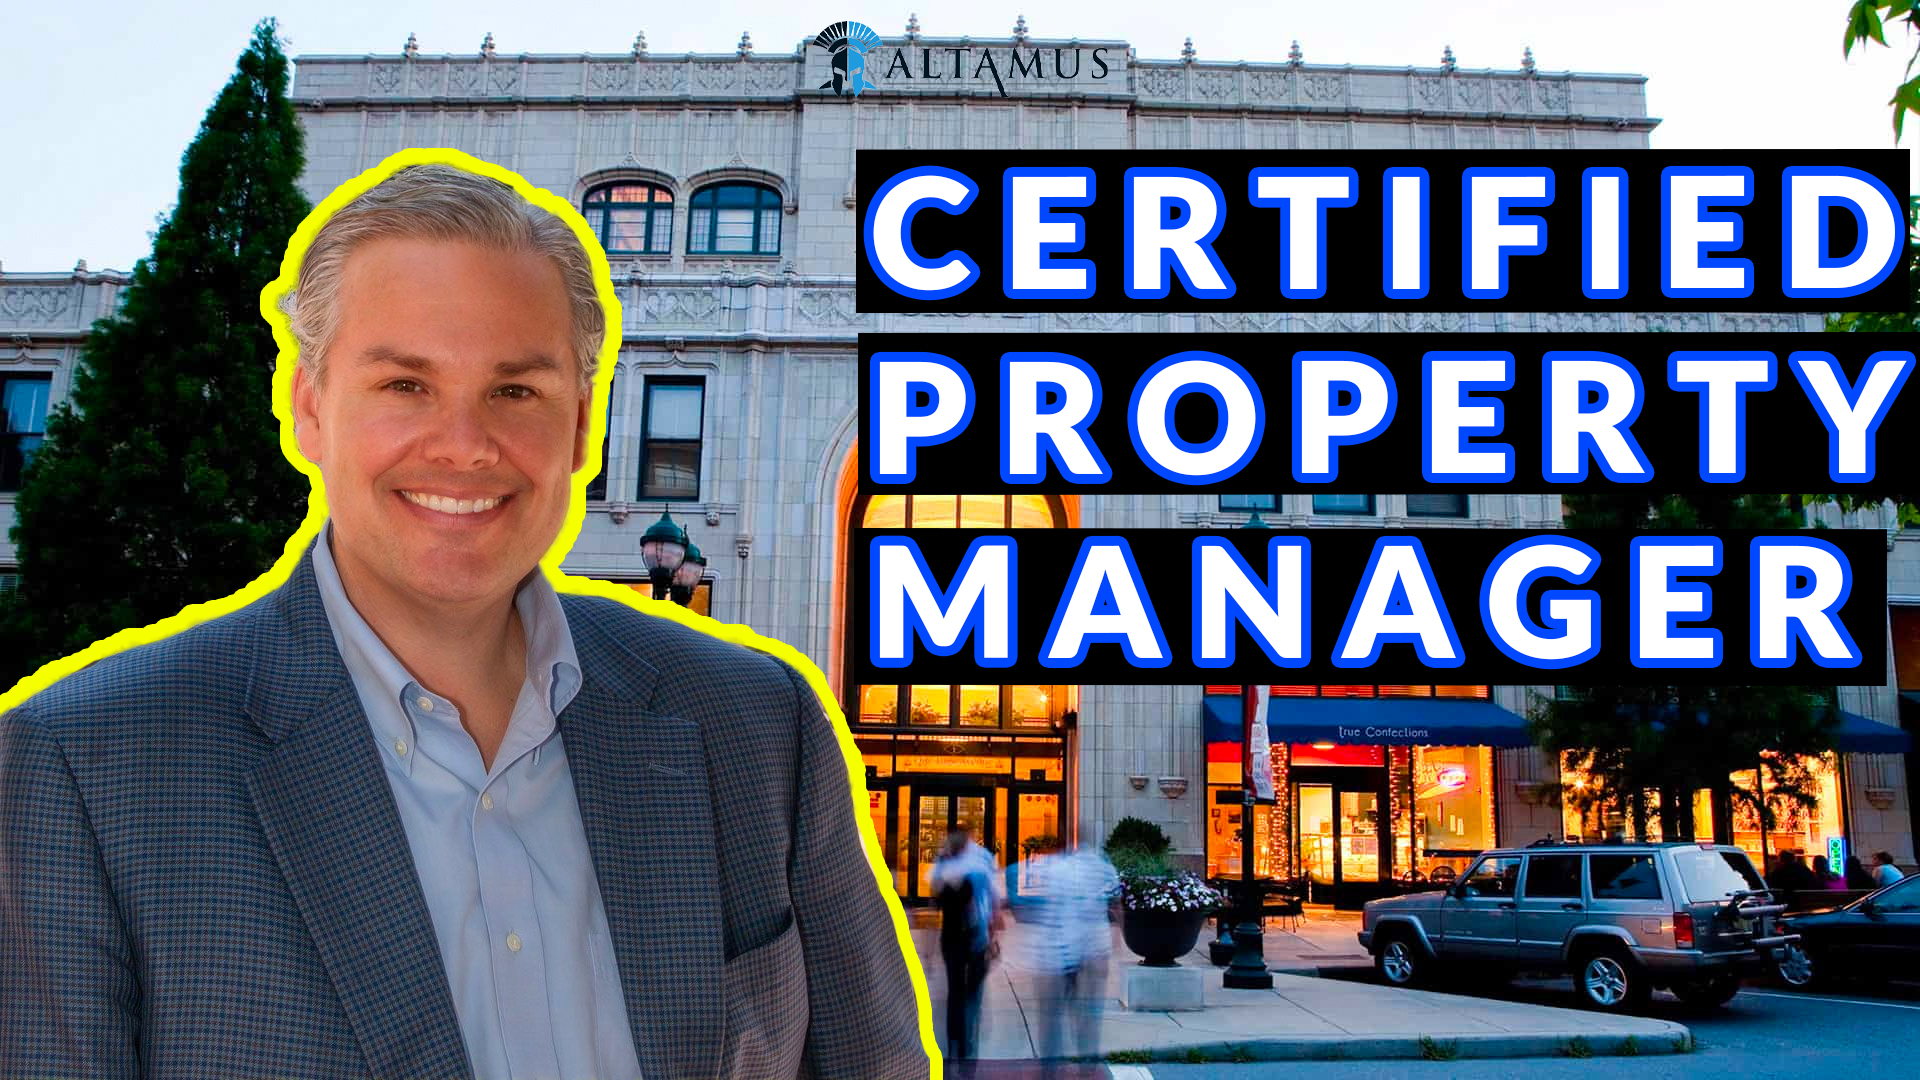 You are currently viewing 183. Commercial Property Management with Wes Reinhardt CPM